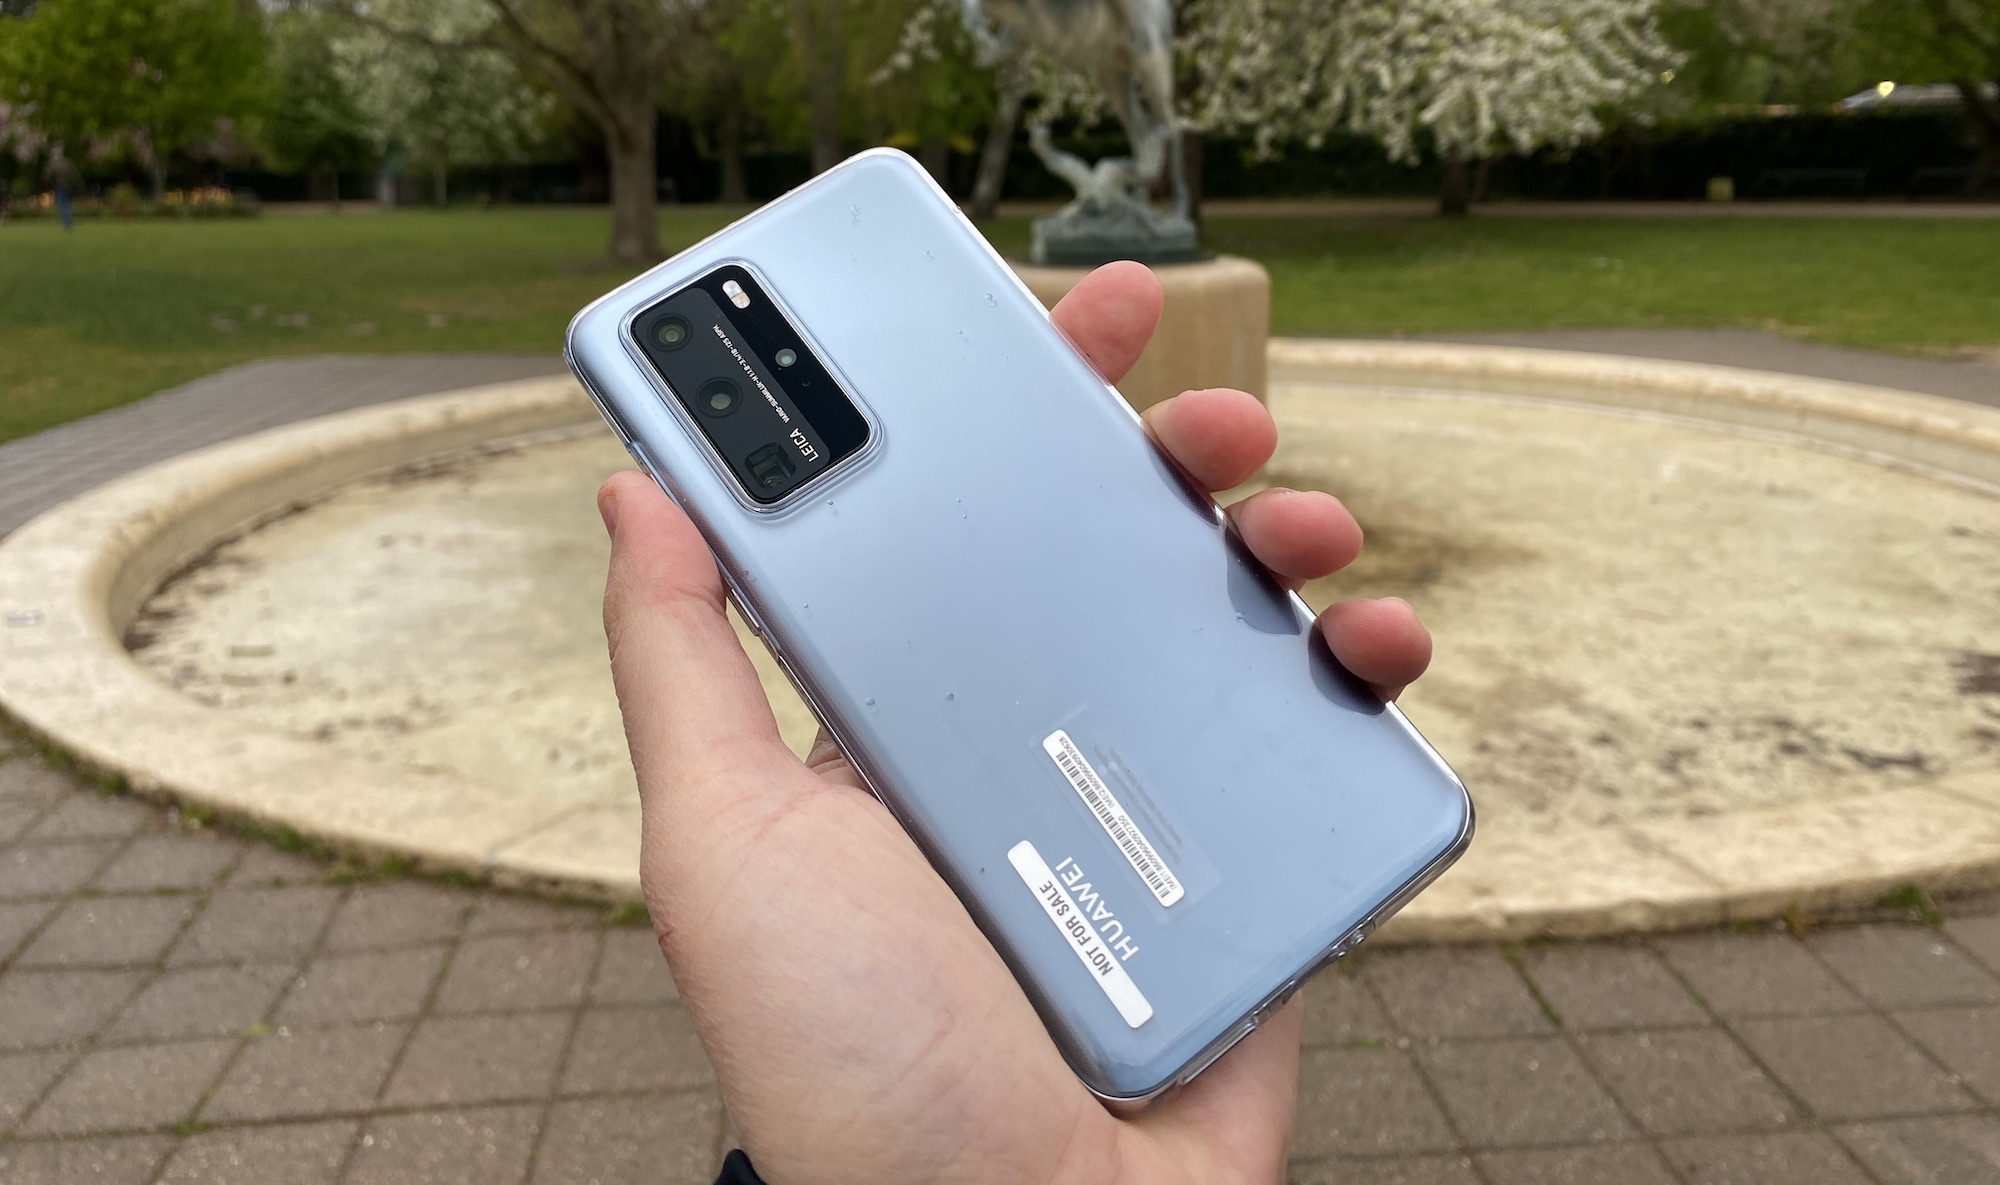 A Huawei P40 Pro being held in a hand